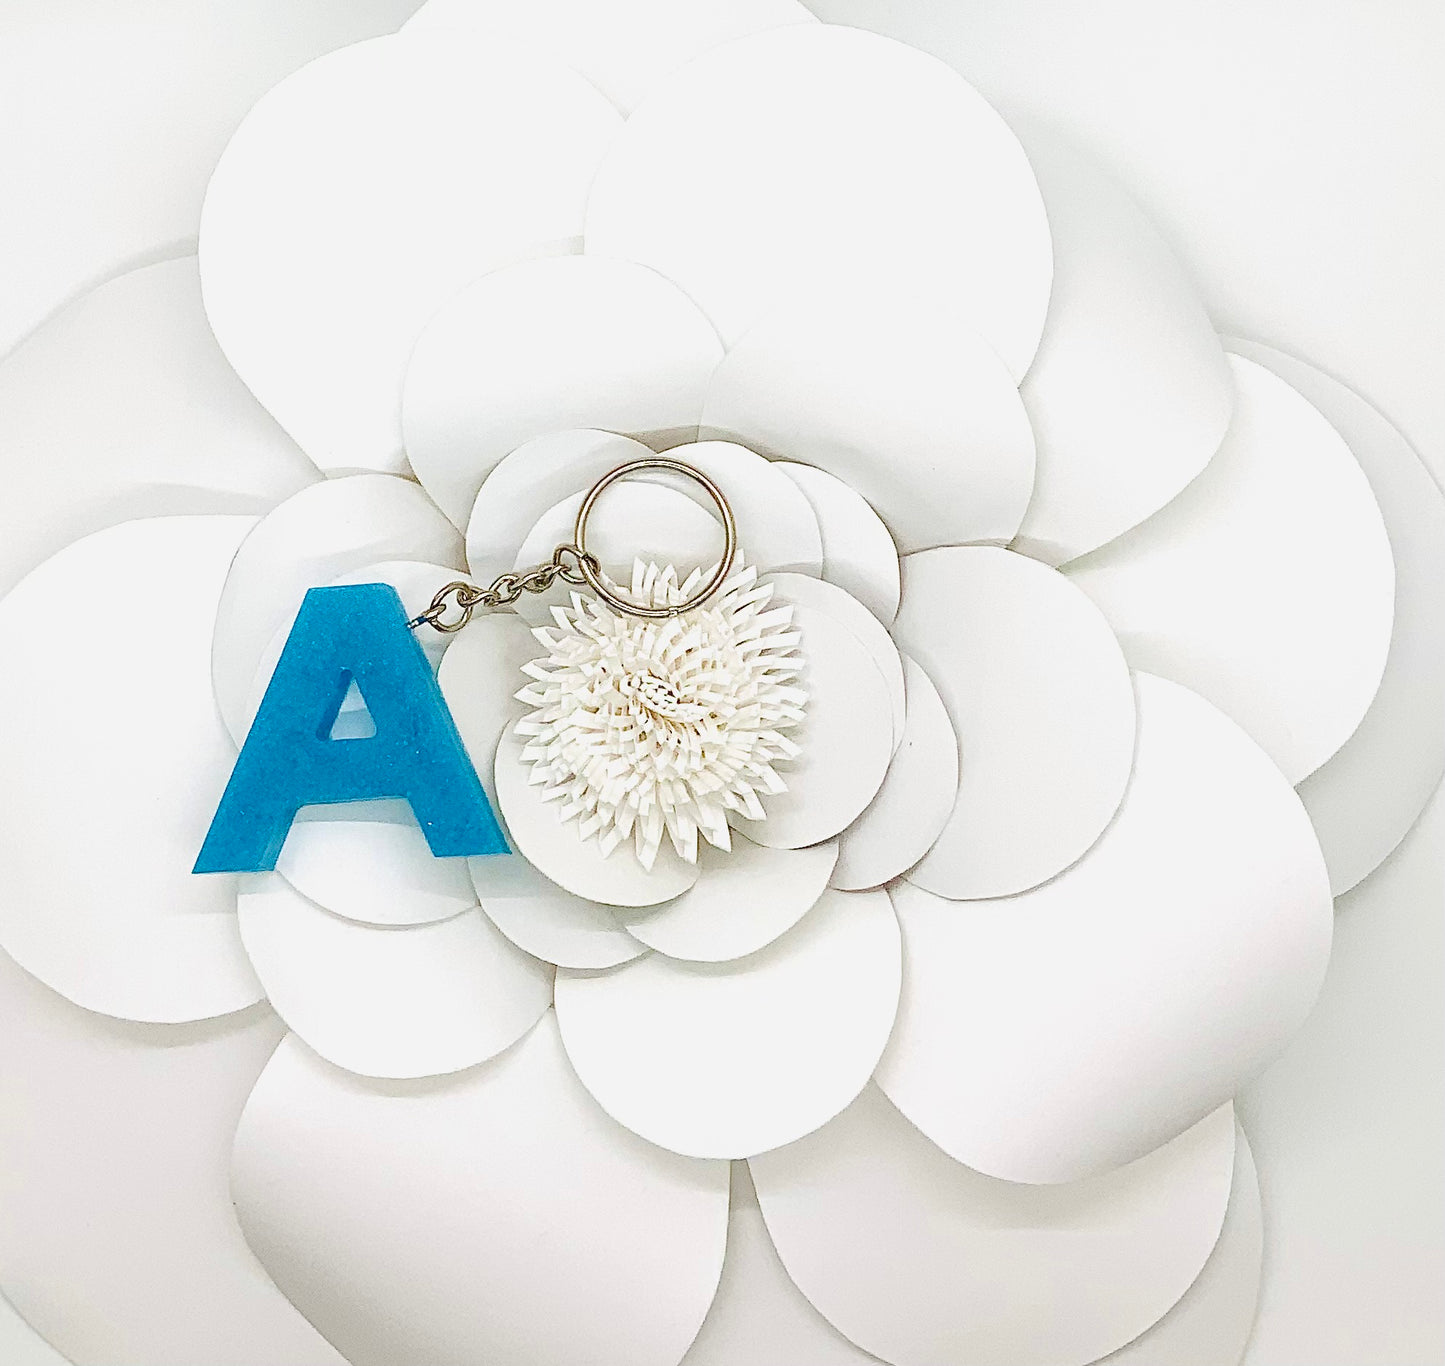 The Letter "A" Keychain